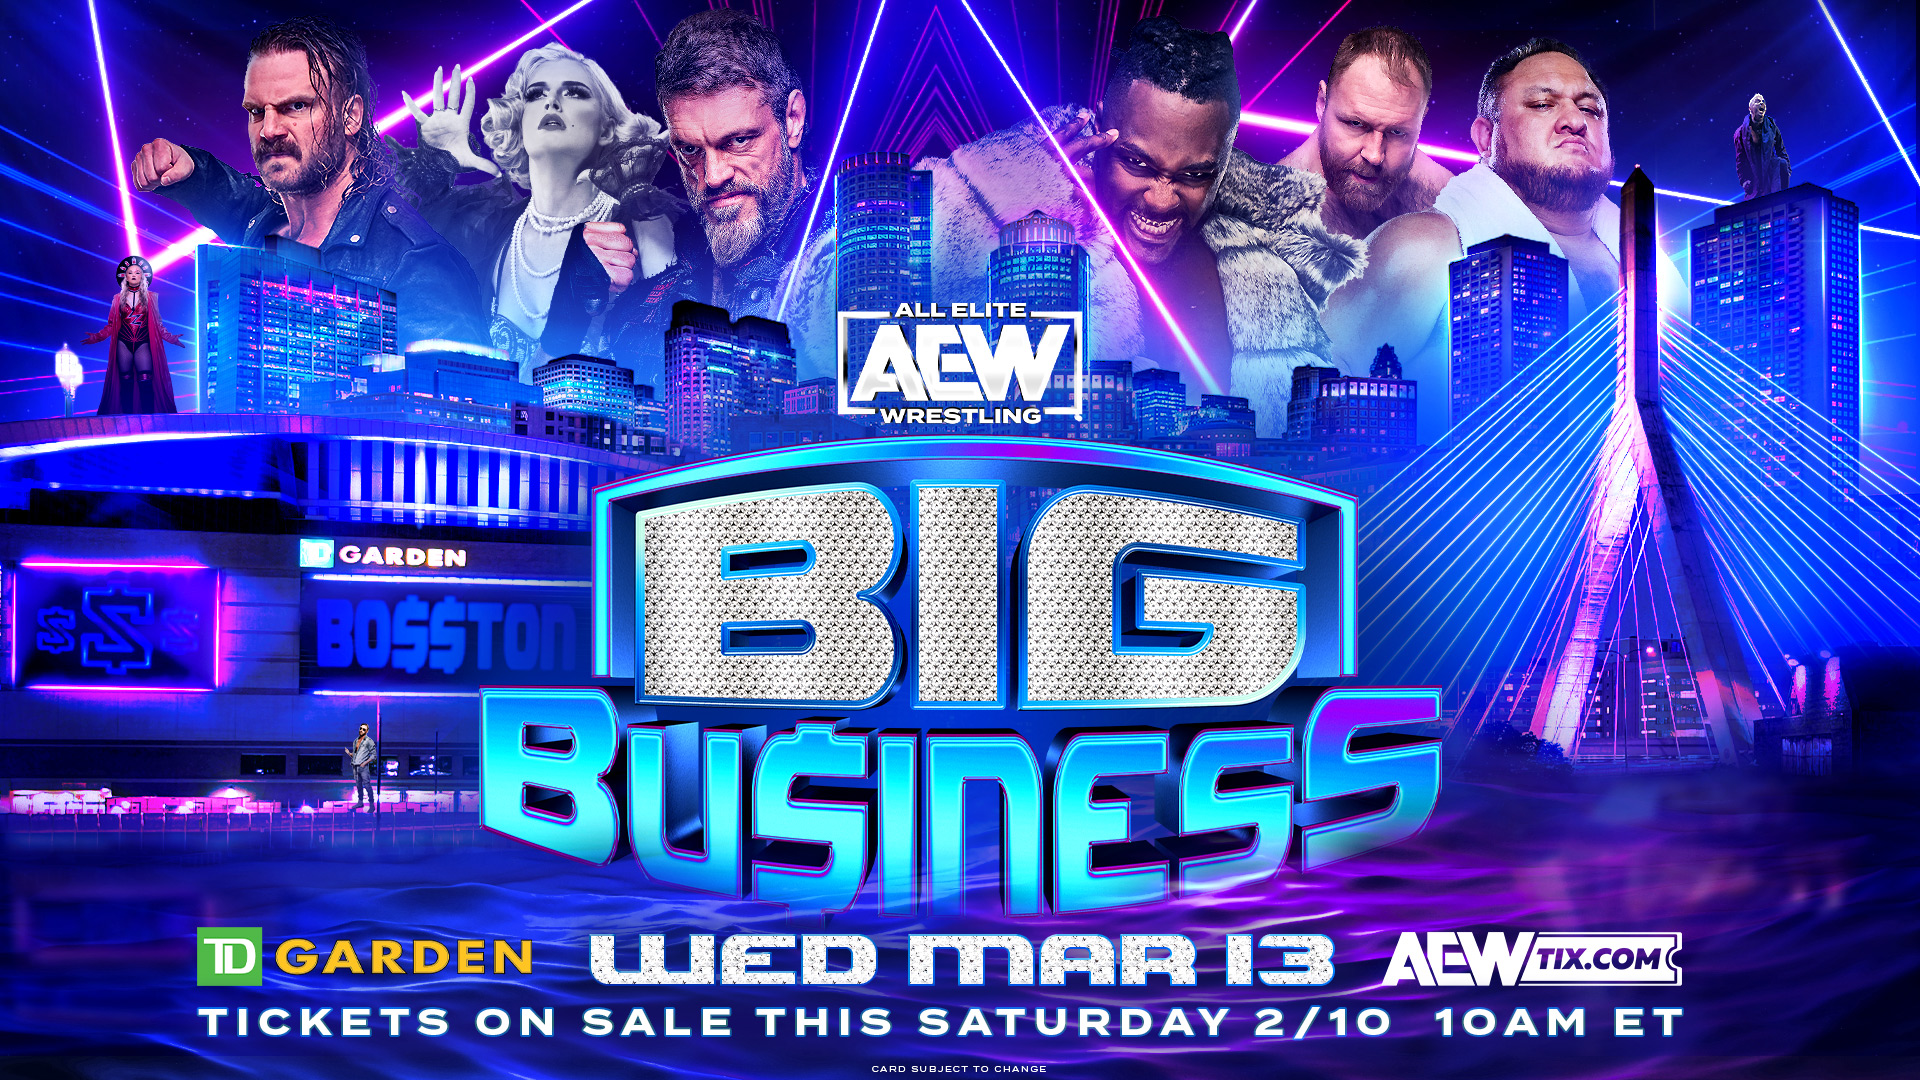 Mercedes Moné debut expected at AEW Dynamite 'Big Business' next month